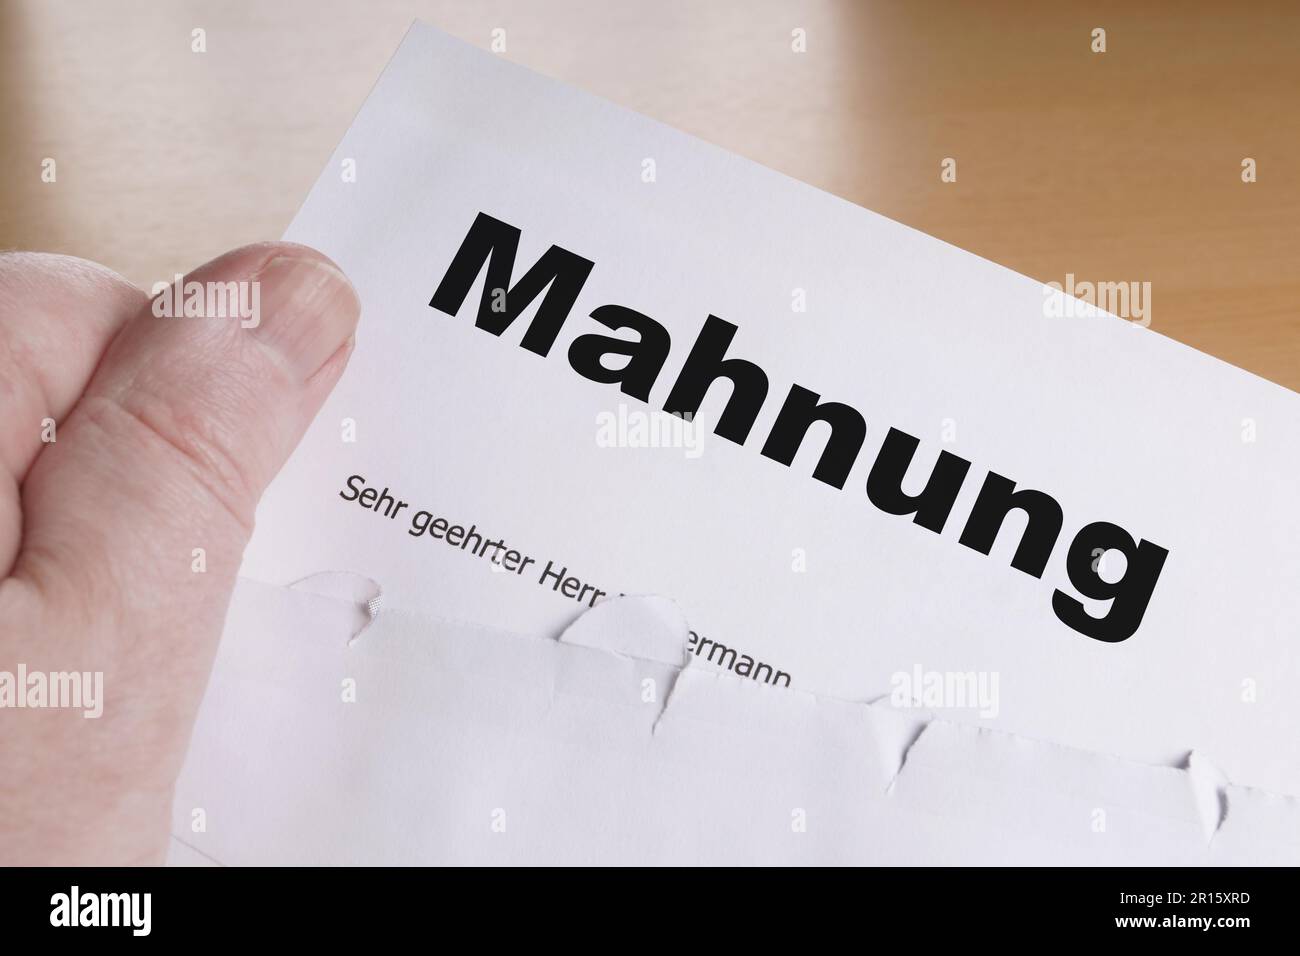 Mahnung male hand holding german dunning or reminder letter Stock Photo